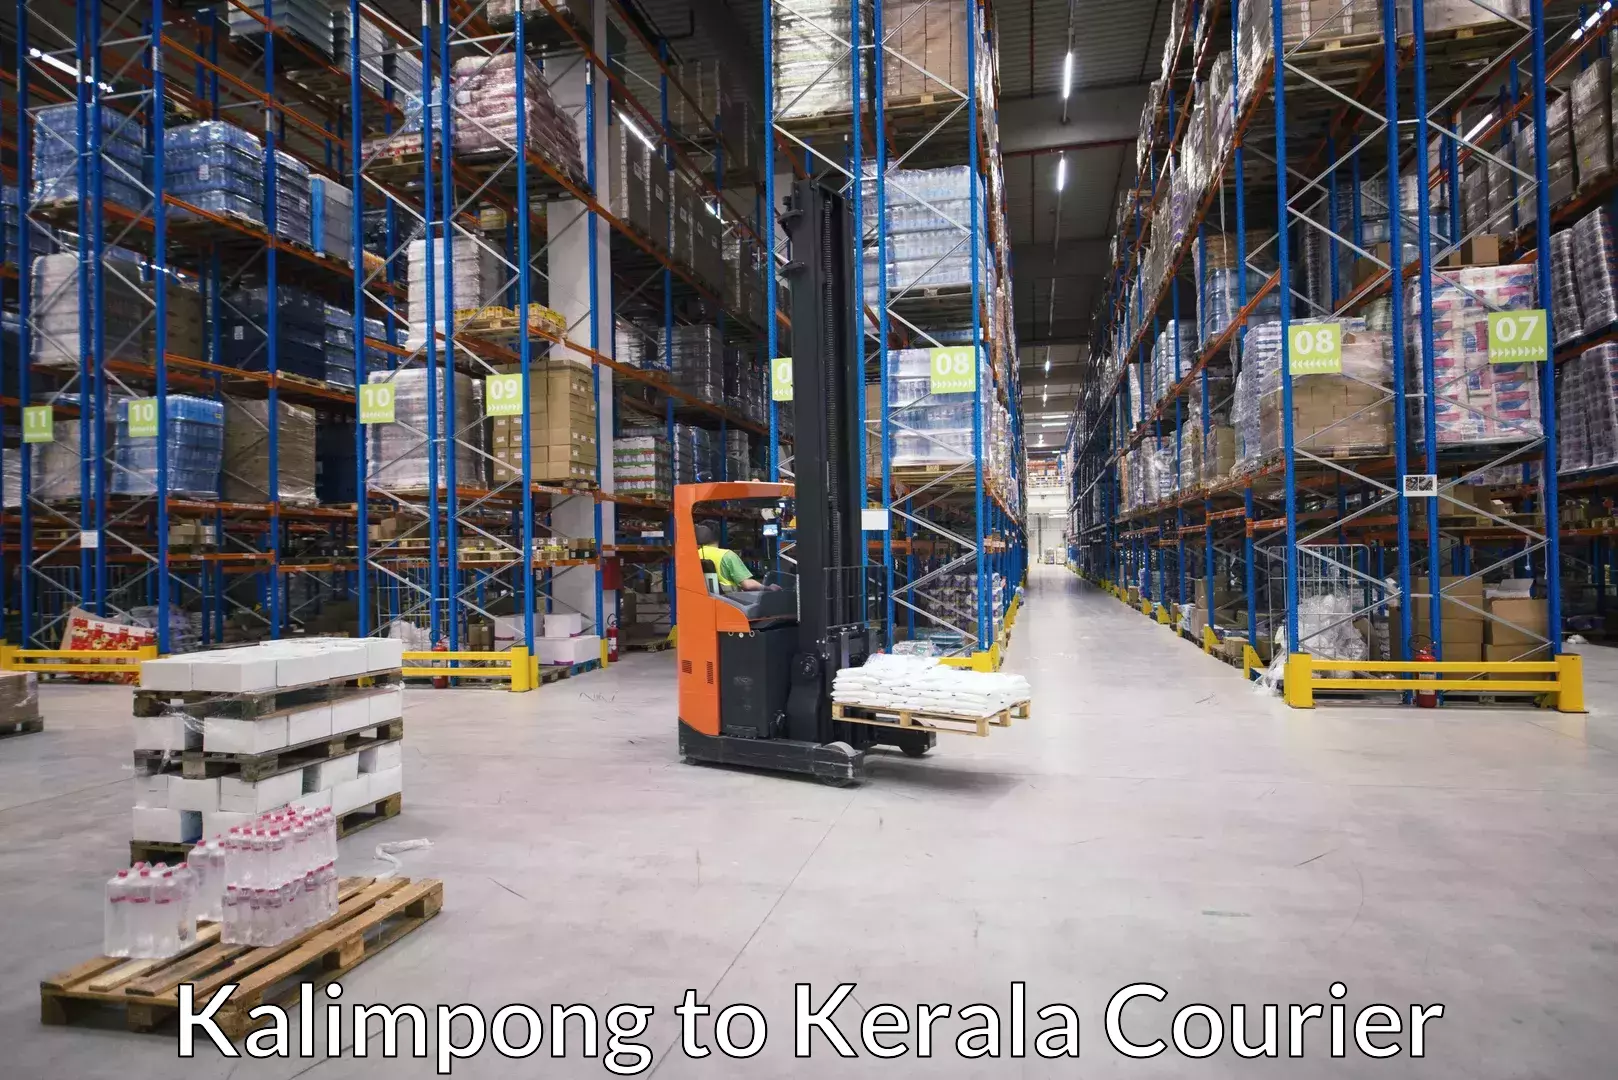 Luggage delivery app Kalimpong to Kerala